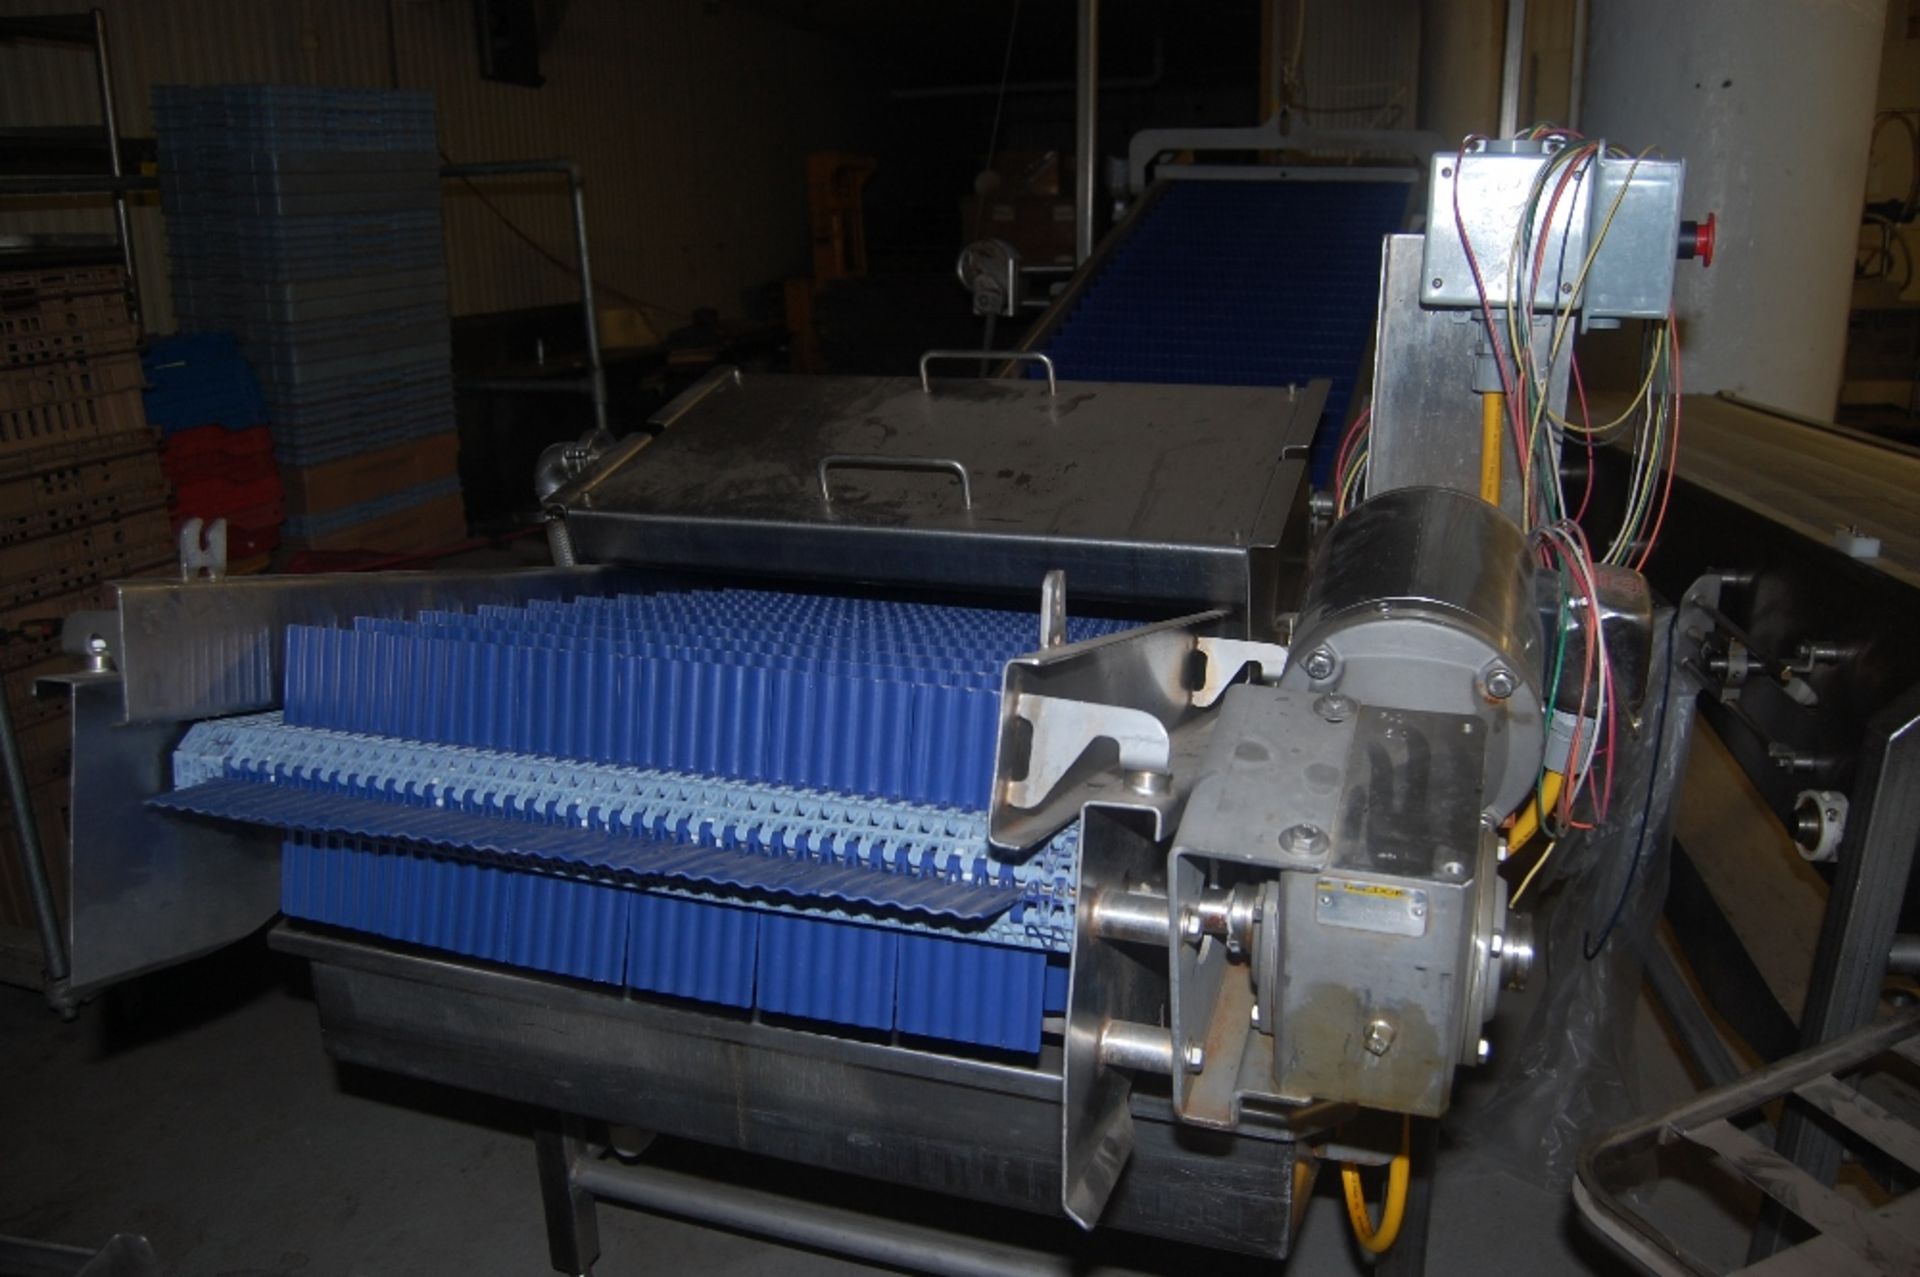 Vegetable washer & conveyor w poly cleated 24 inch belt 208 / 460V 3ph motor SS 16" deep x 13 ft - Image 13 of 19